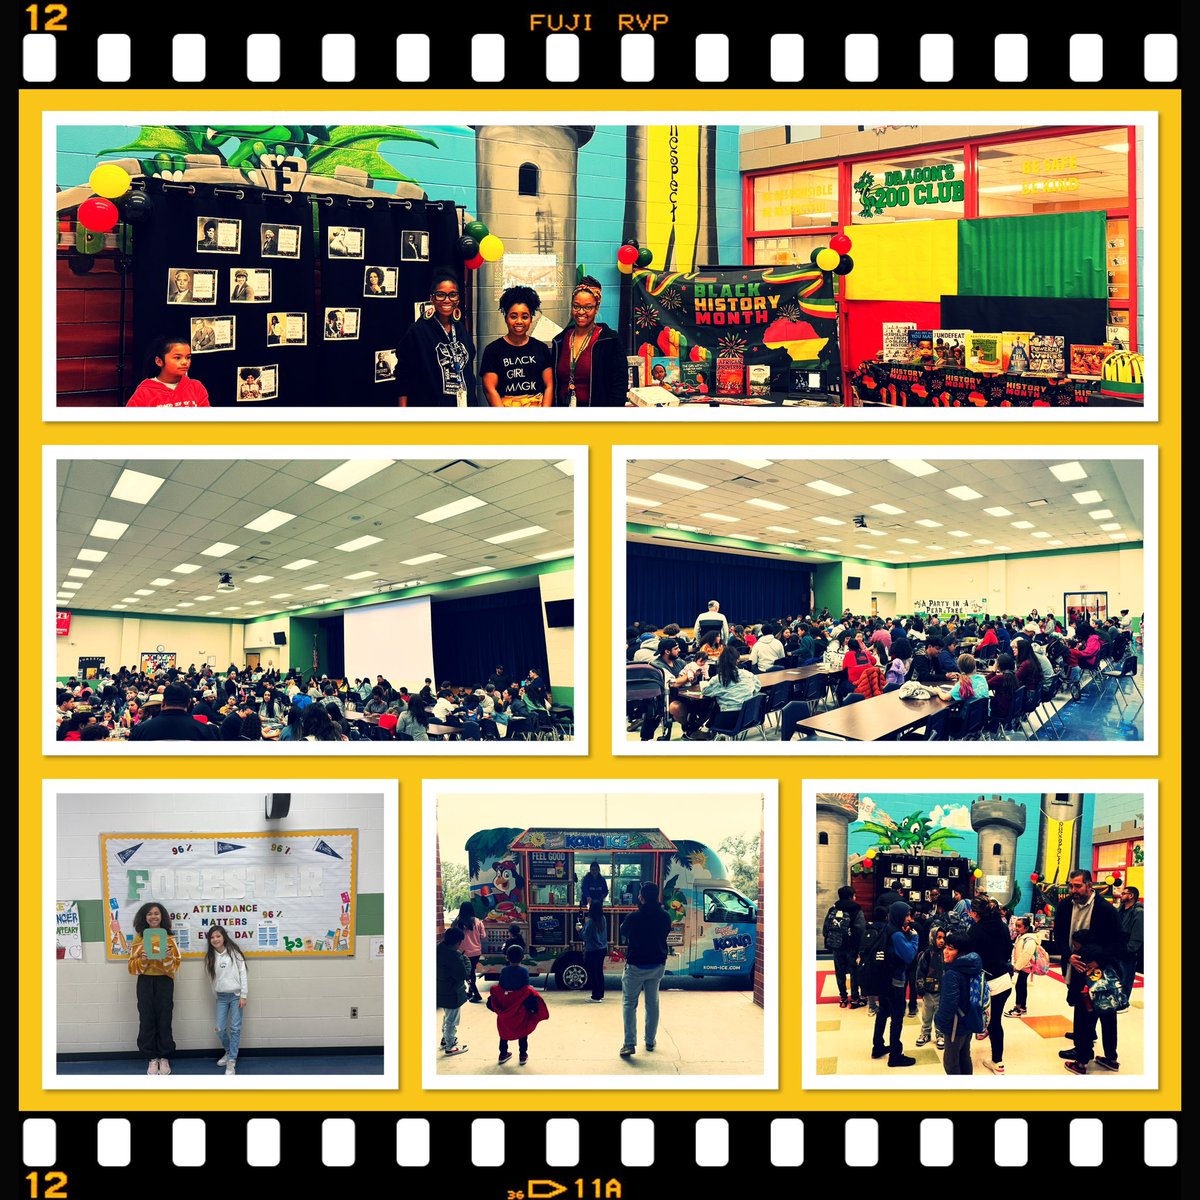 Another great week at Forester! Black History Month celebration, Family game night, and our attendance continues to rock! @NISD